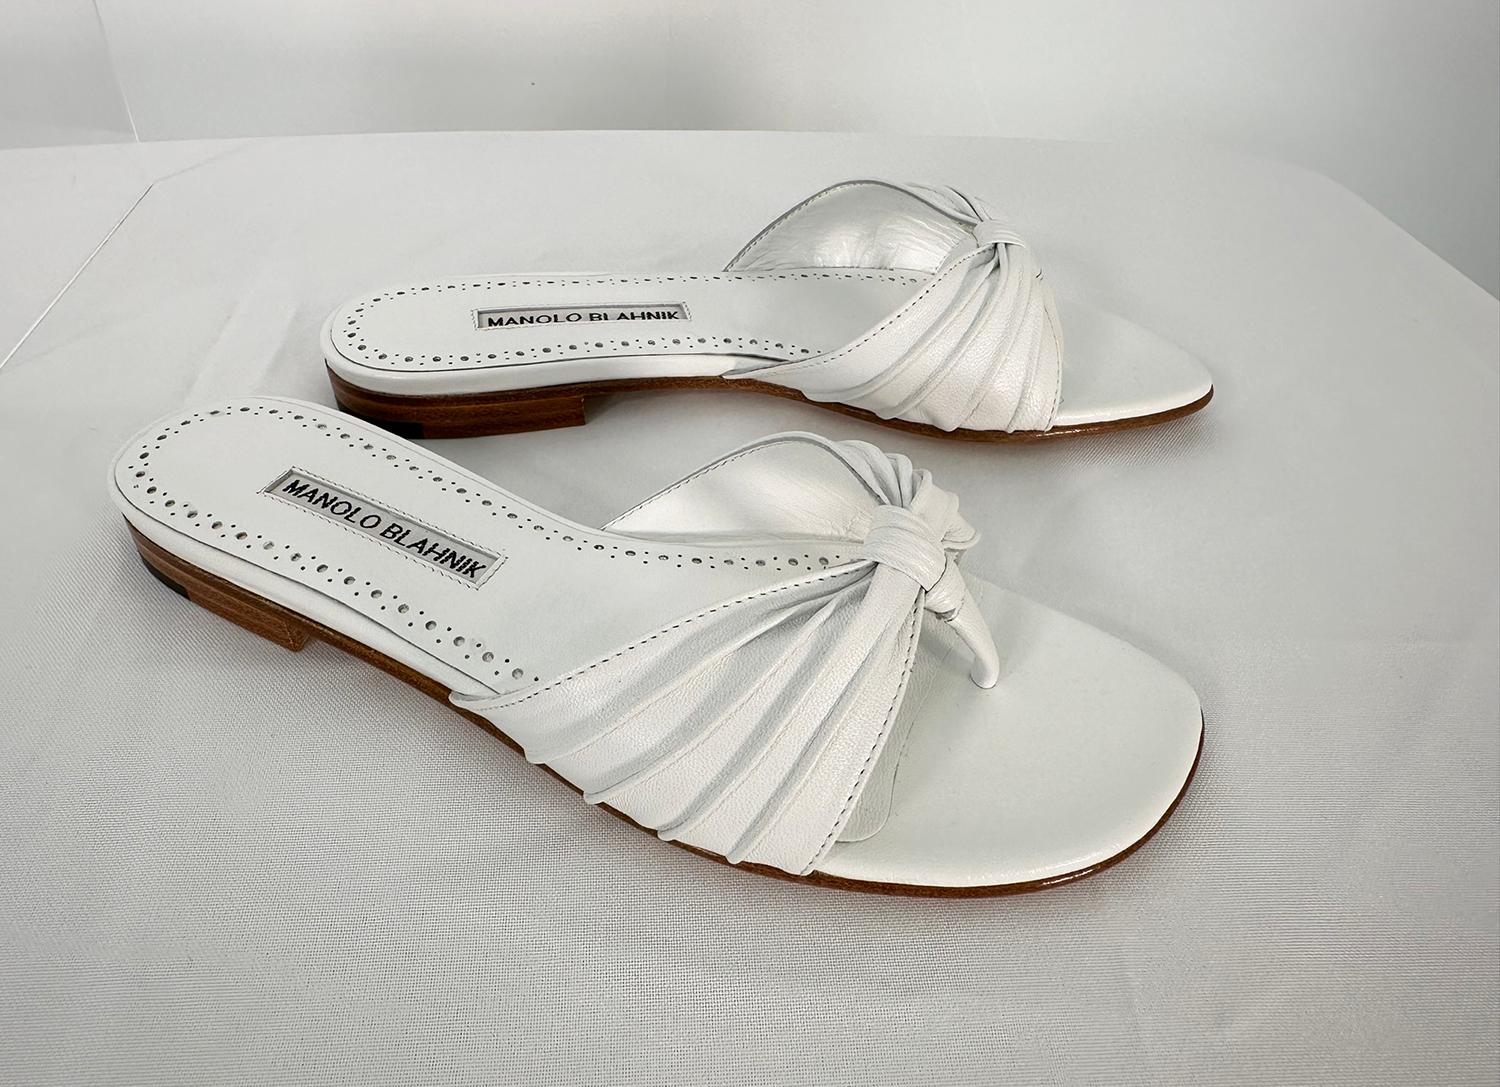 Manolo Blahnik White Leather Thong Sandals 37 Unworn with Box 2